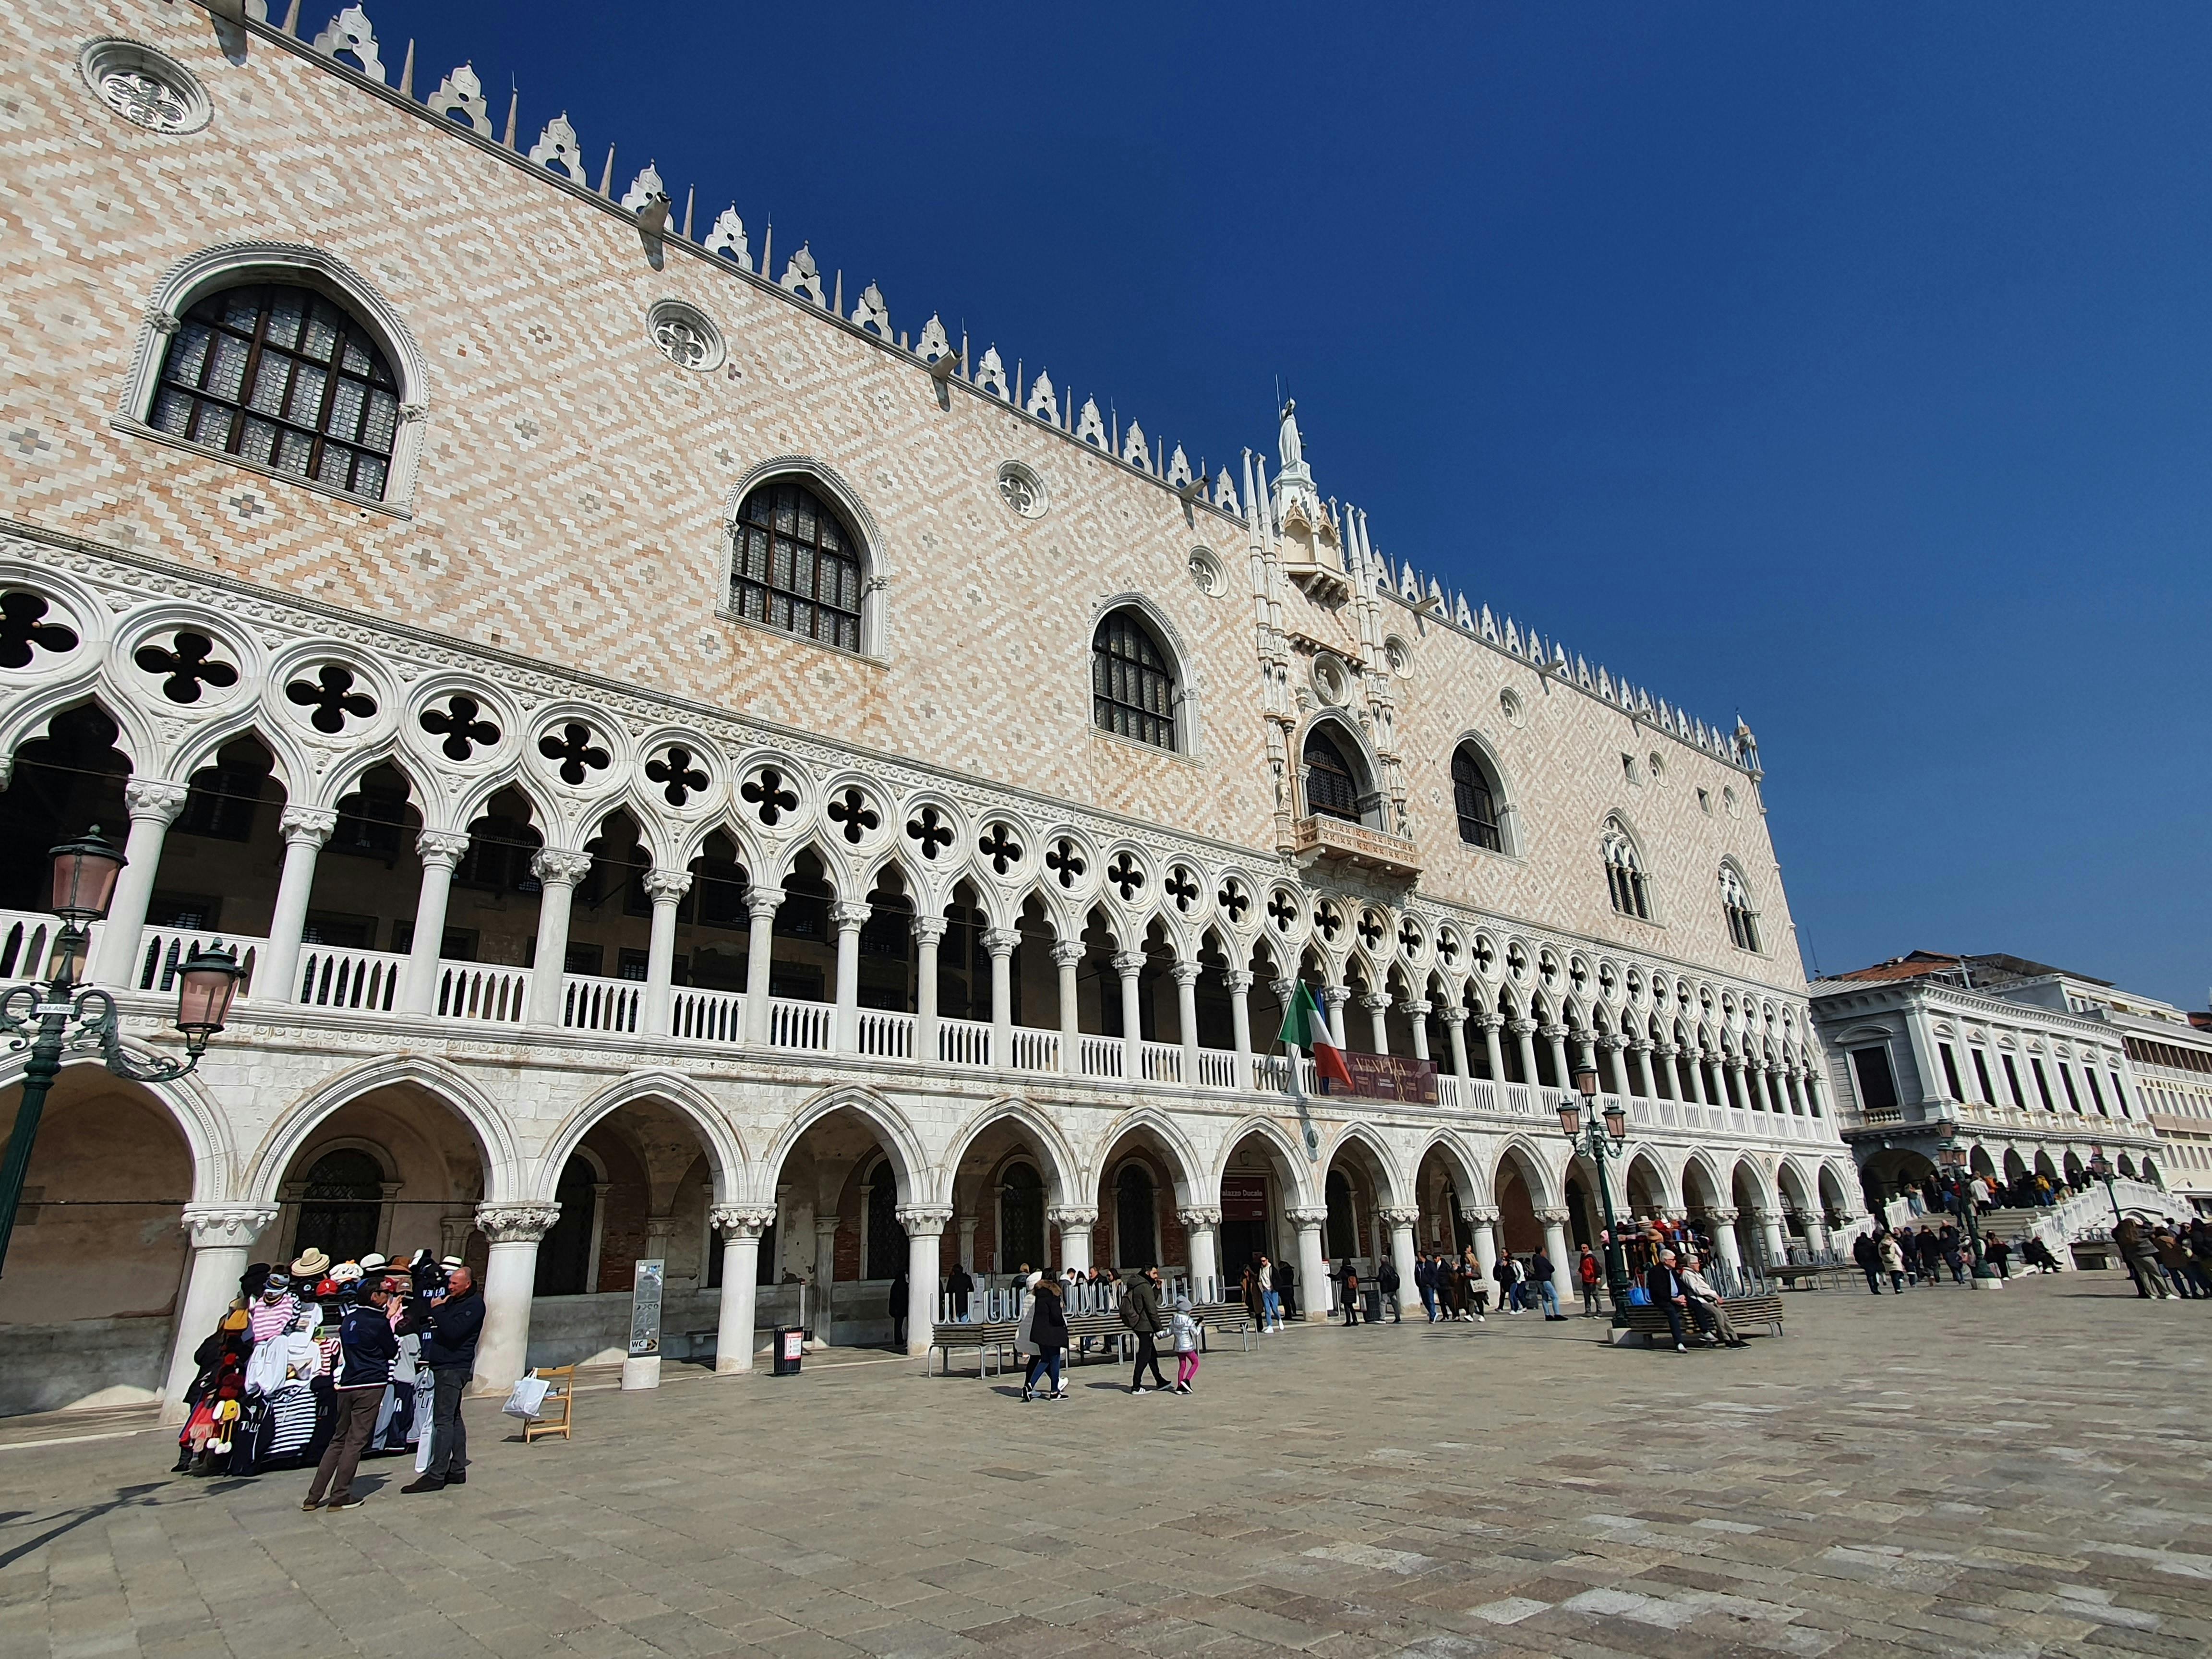 Early entrance combo tour to Doge's palace and St. Mark's Basilica